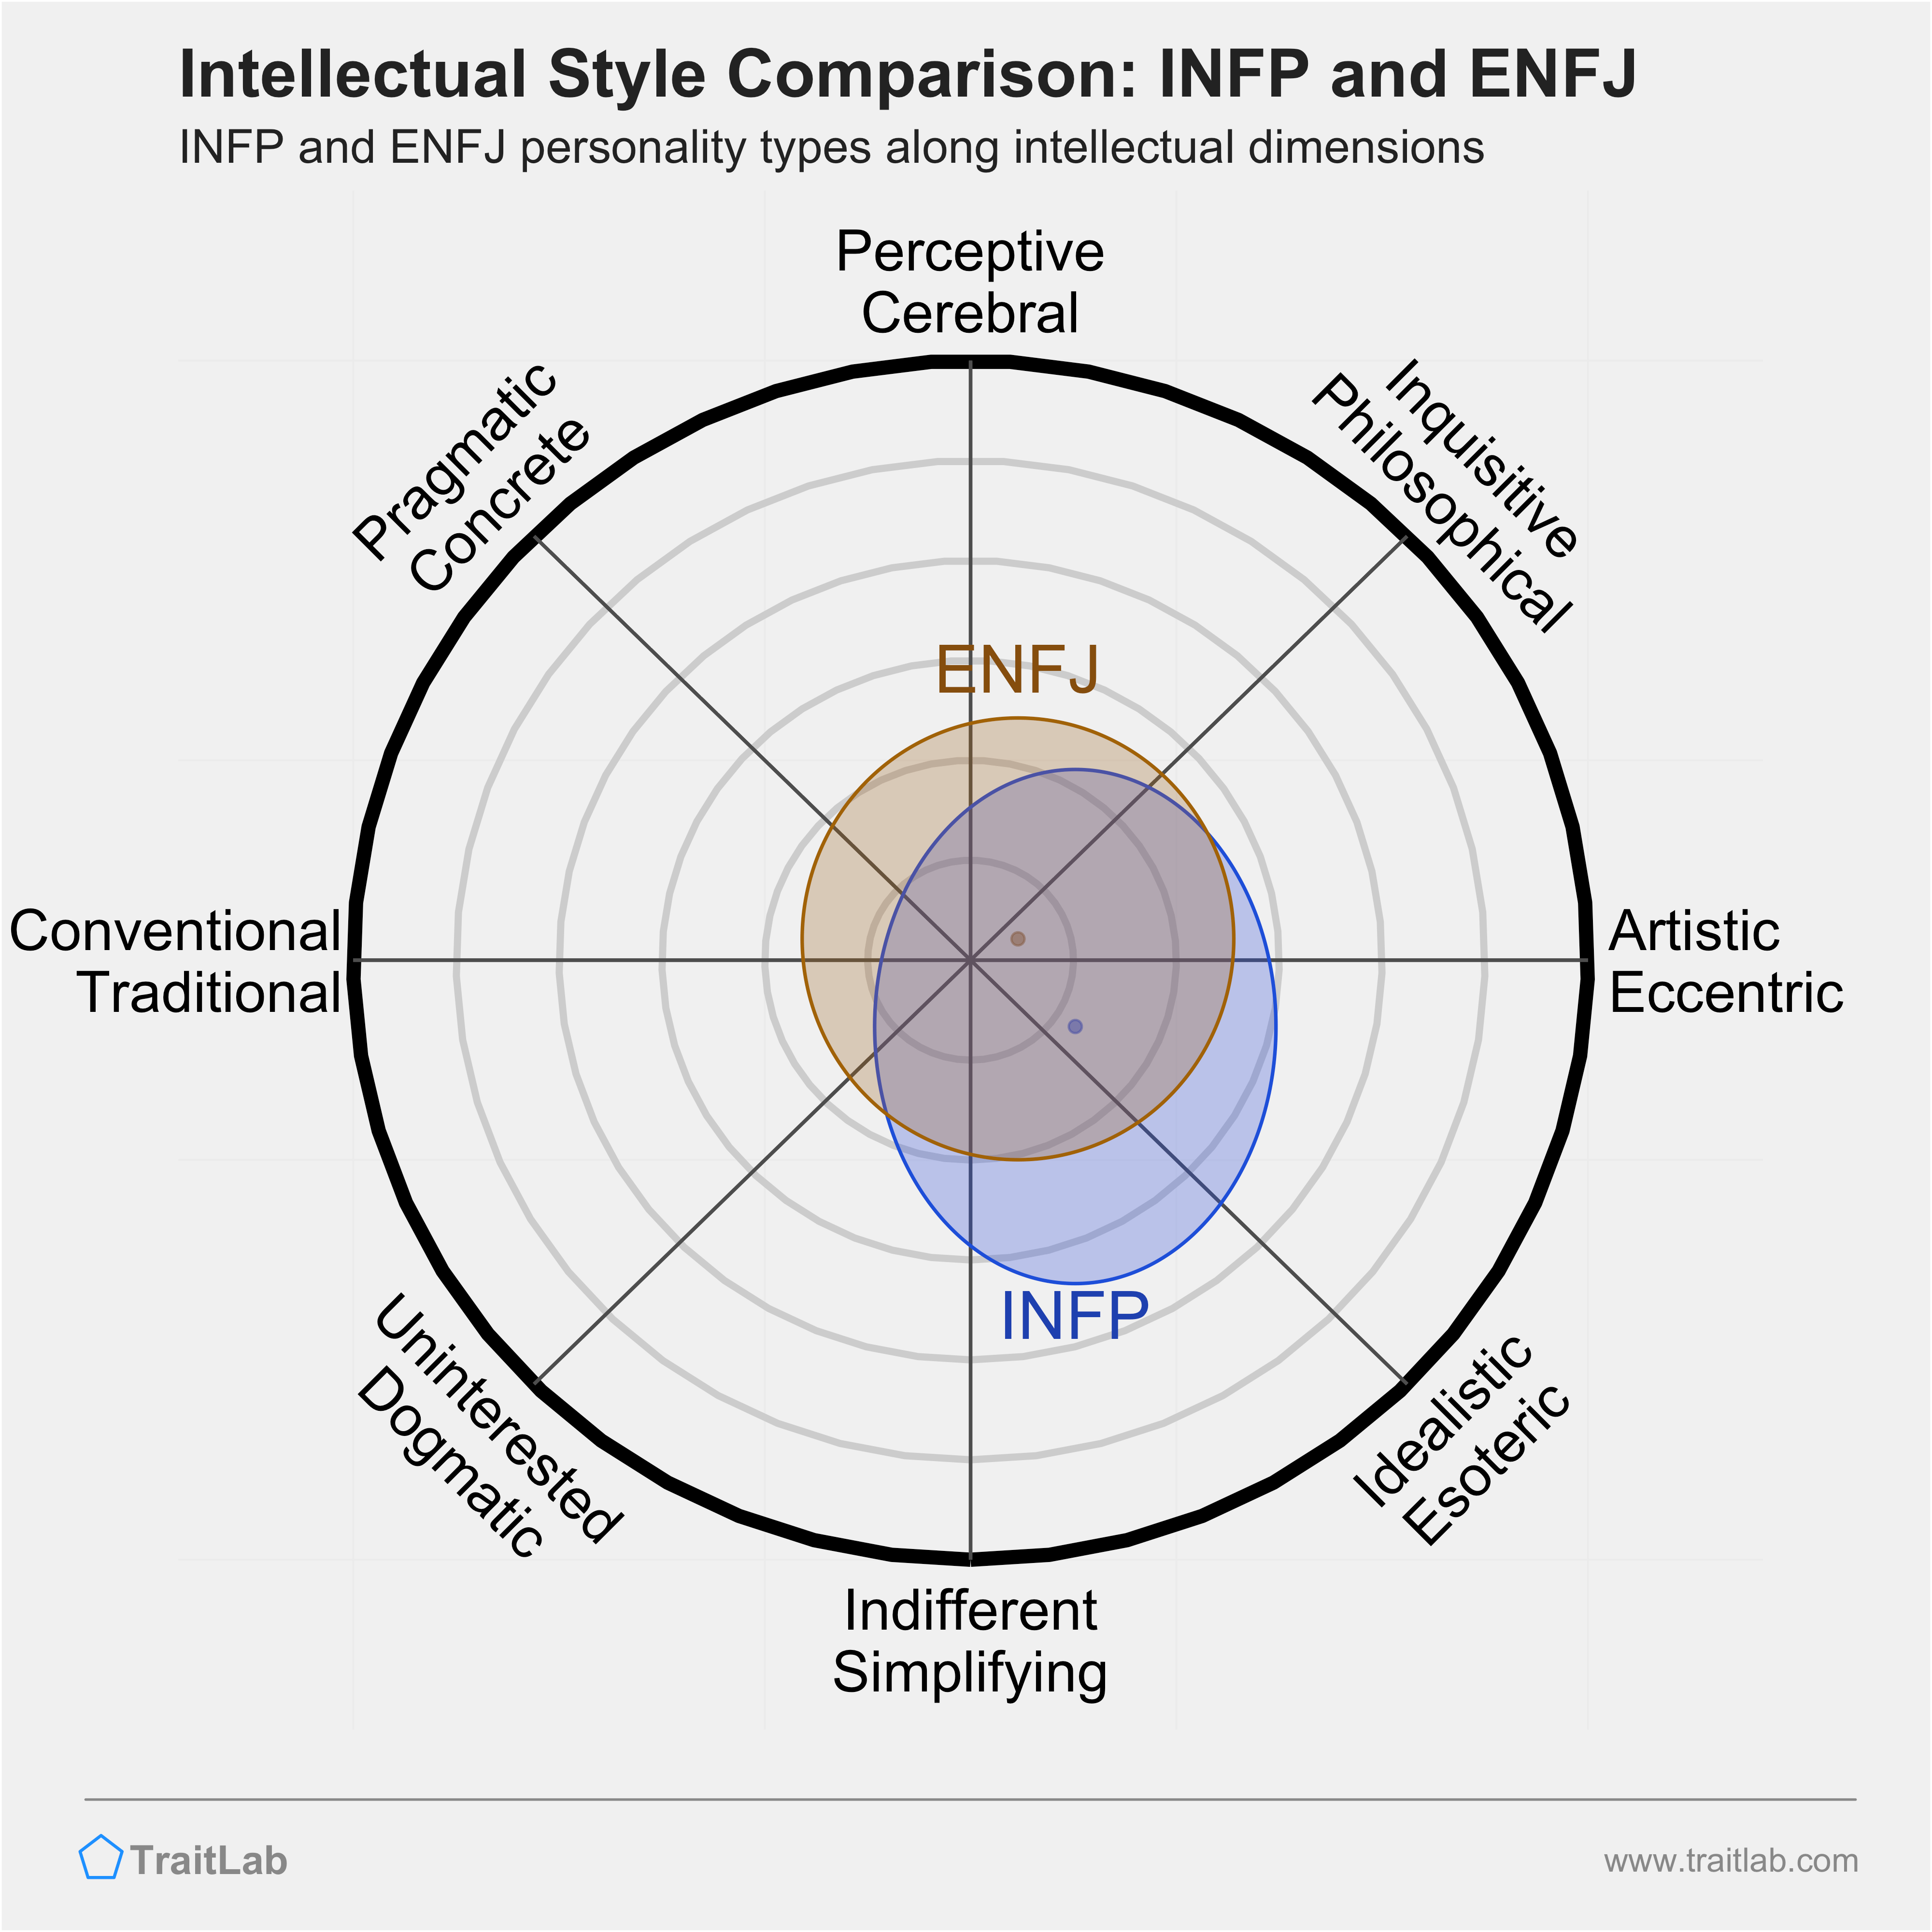 INFP and ENFJ comparison across intellectual dimensions